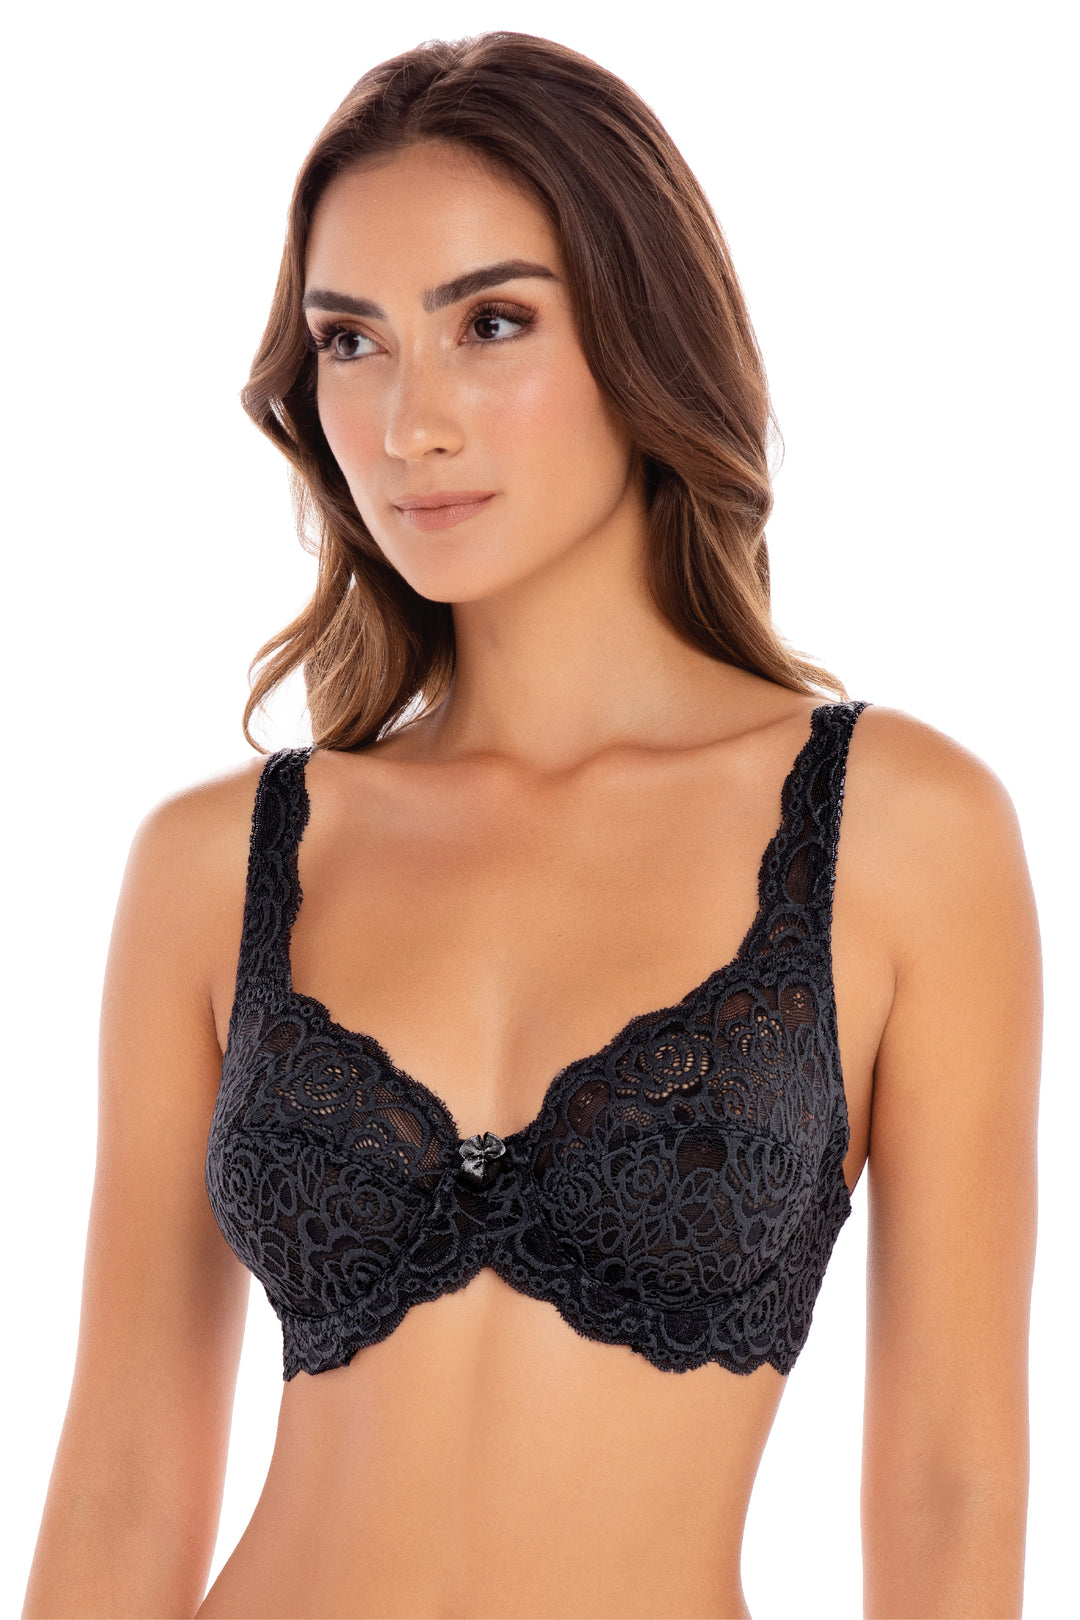 YOURS 2 PACK Black & White Lace Non-Padded Underwired Bras